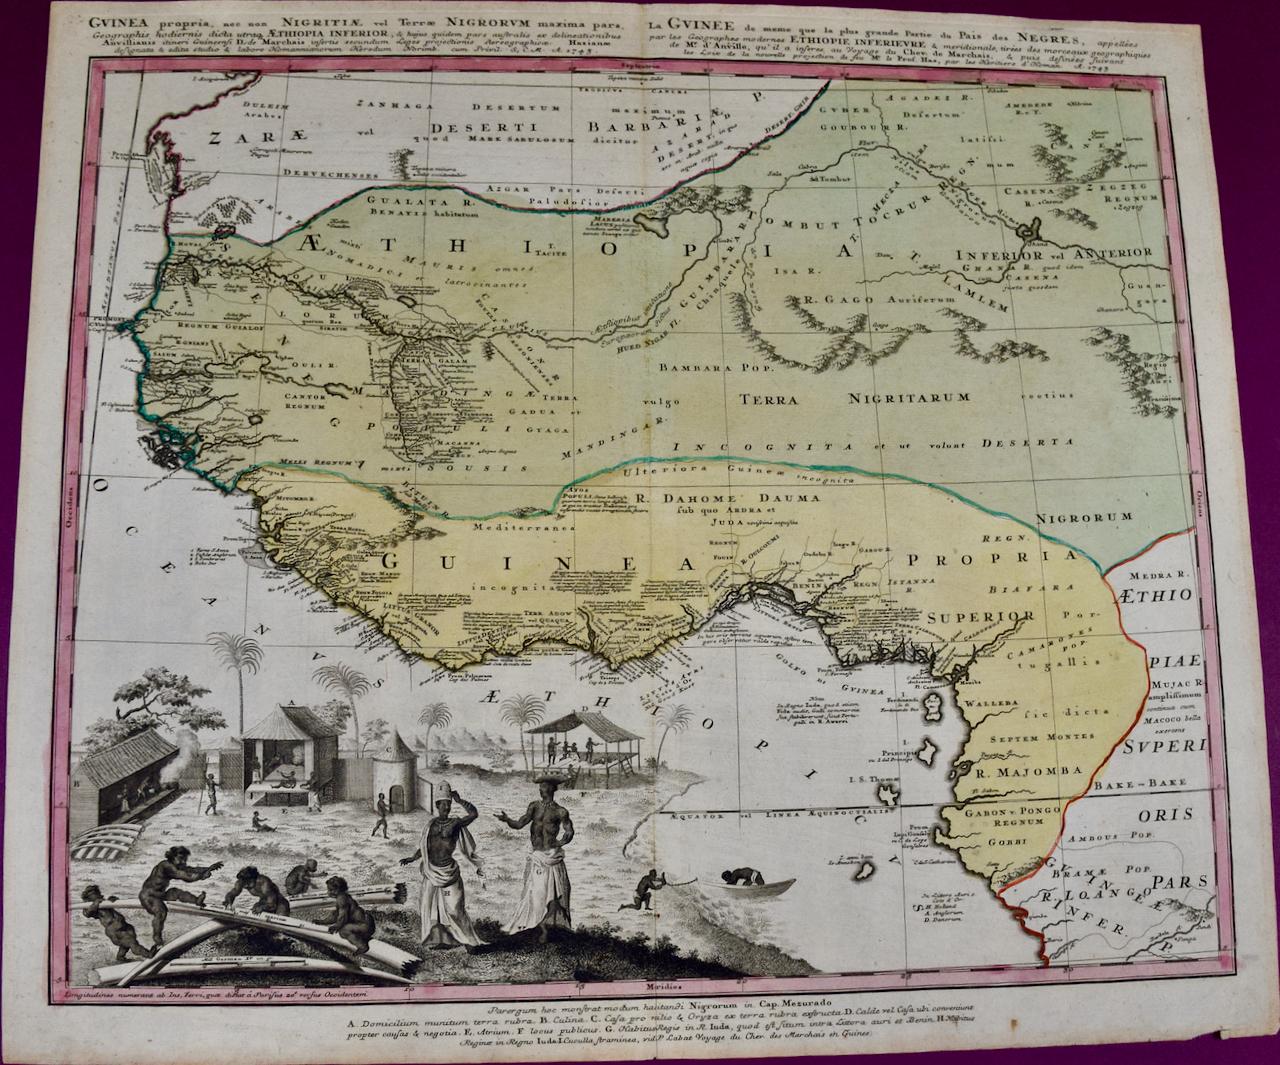 West Africa: 18th Century Hand-colored Homann Map Entitled "Guinea Propria"